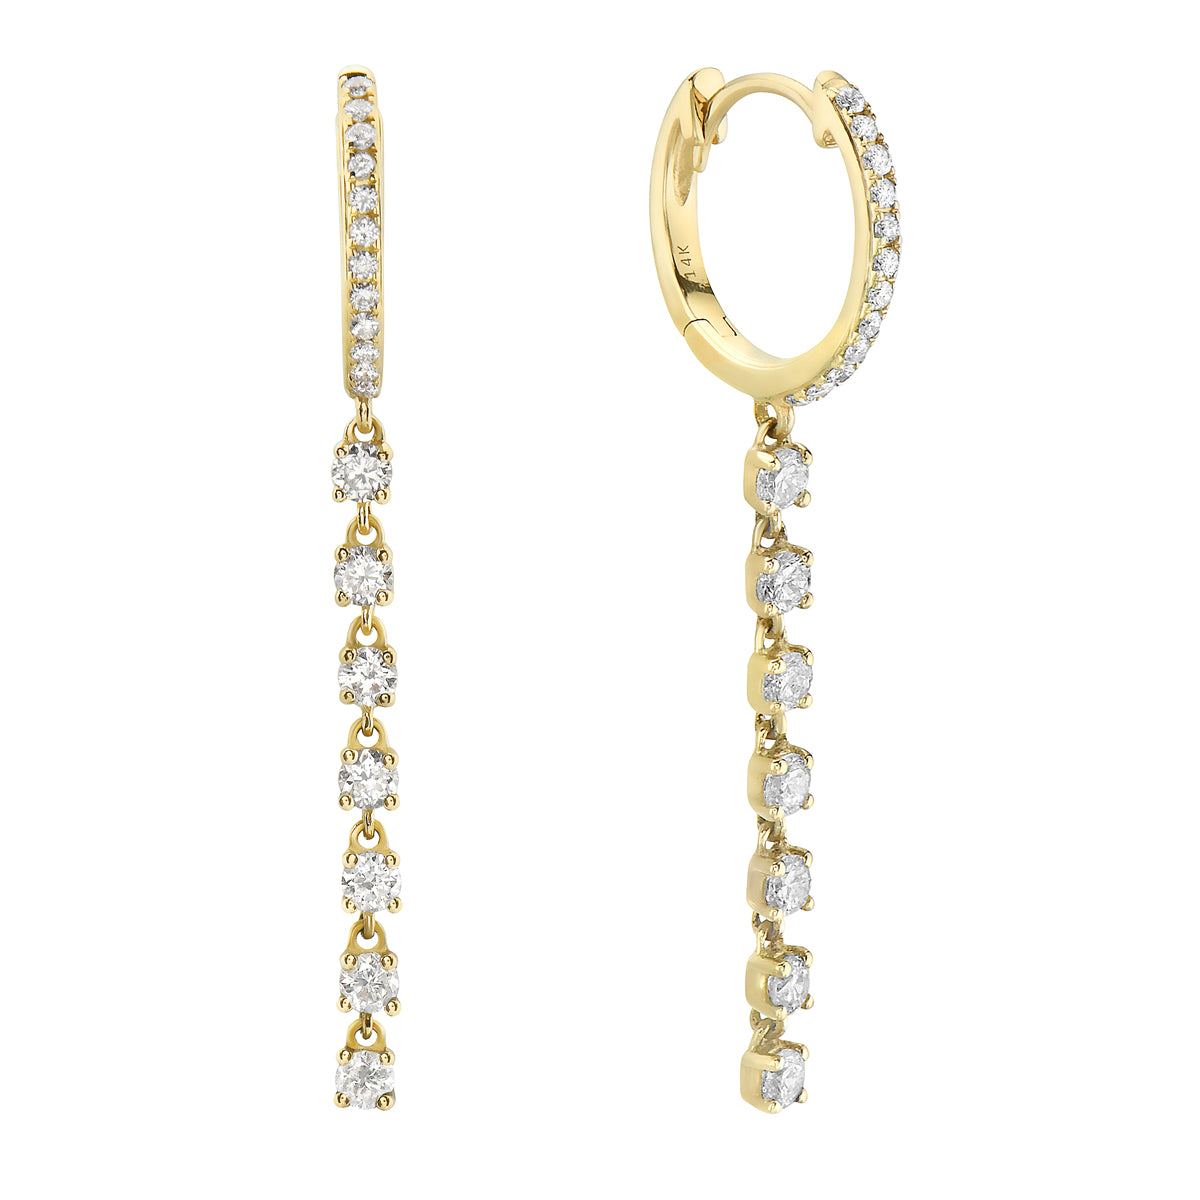 Earring 18KY/3.5G 14RD-0.63CT 24RD-0.30CT